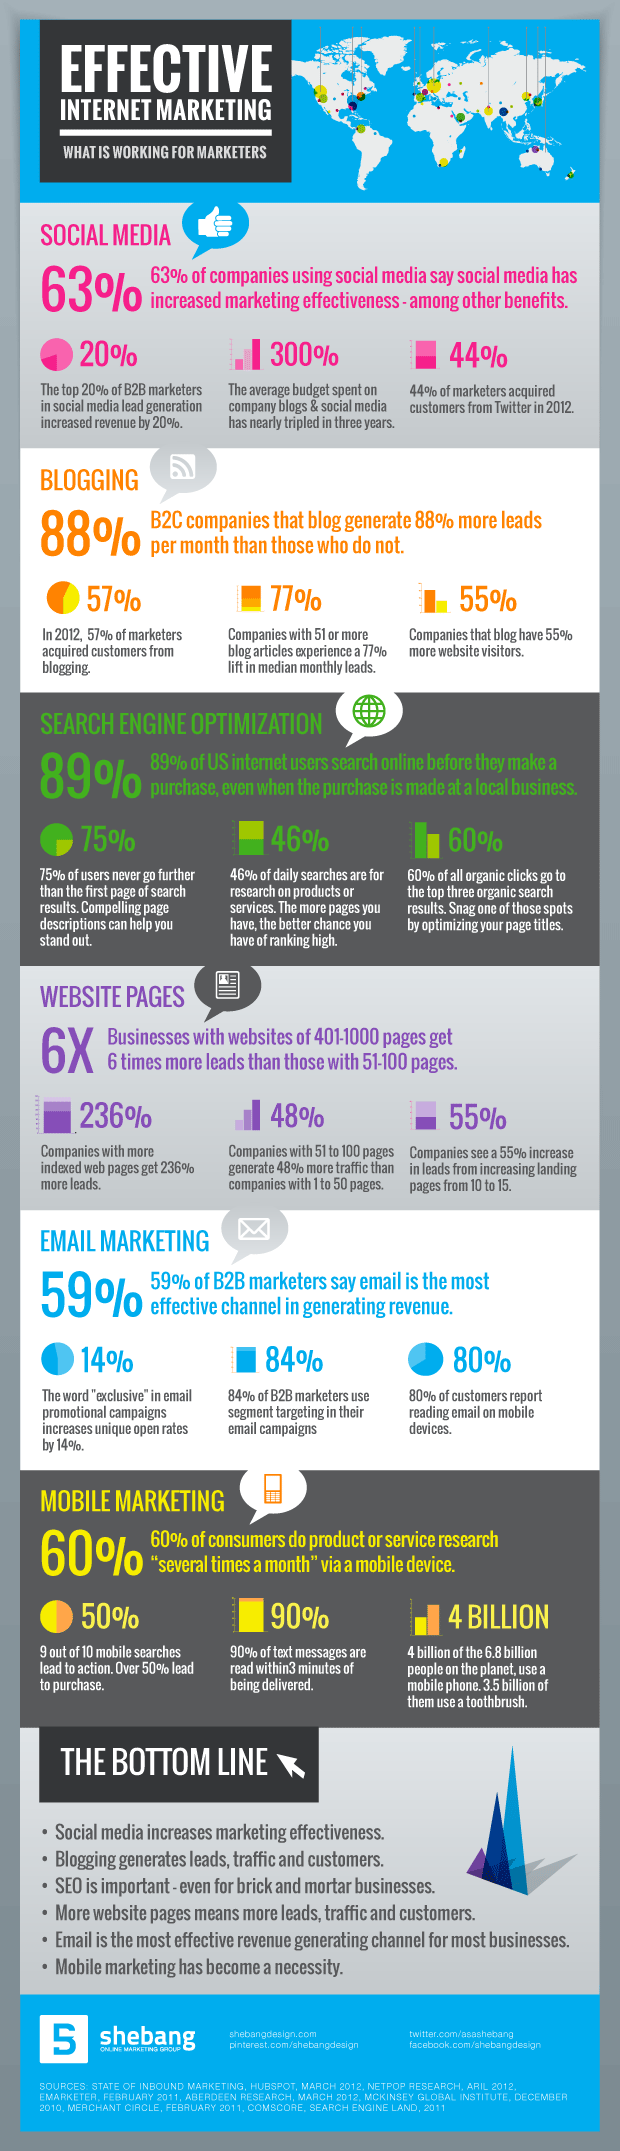 Internet Marketing Strategies For 2013 That Will Work [Infographic]